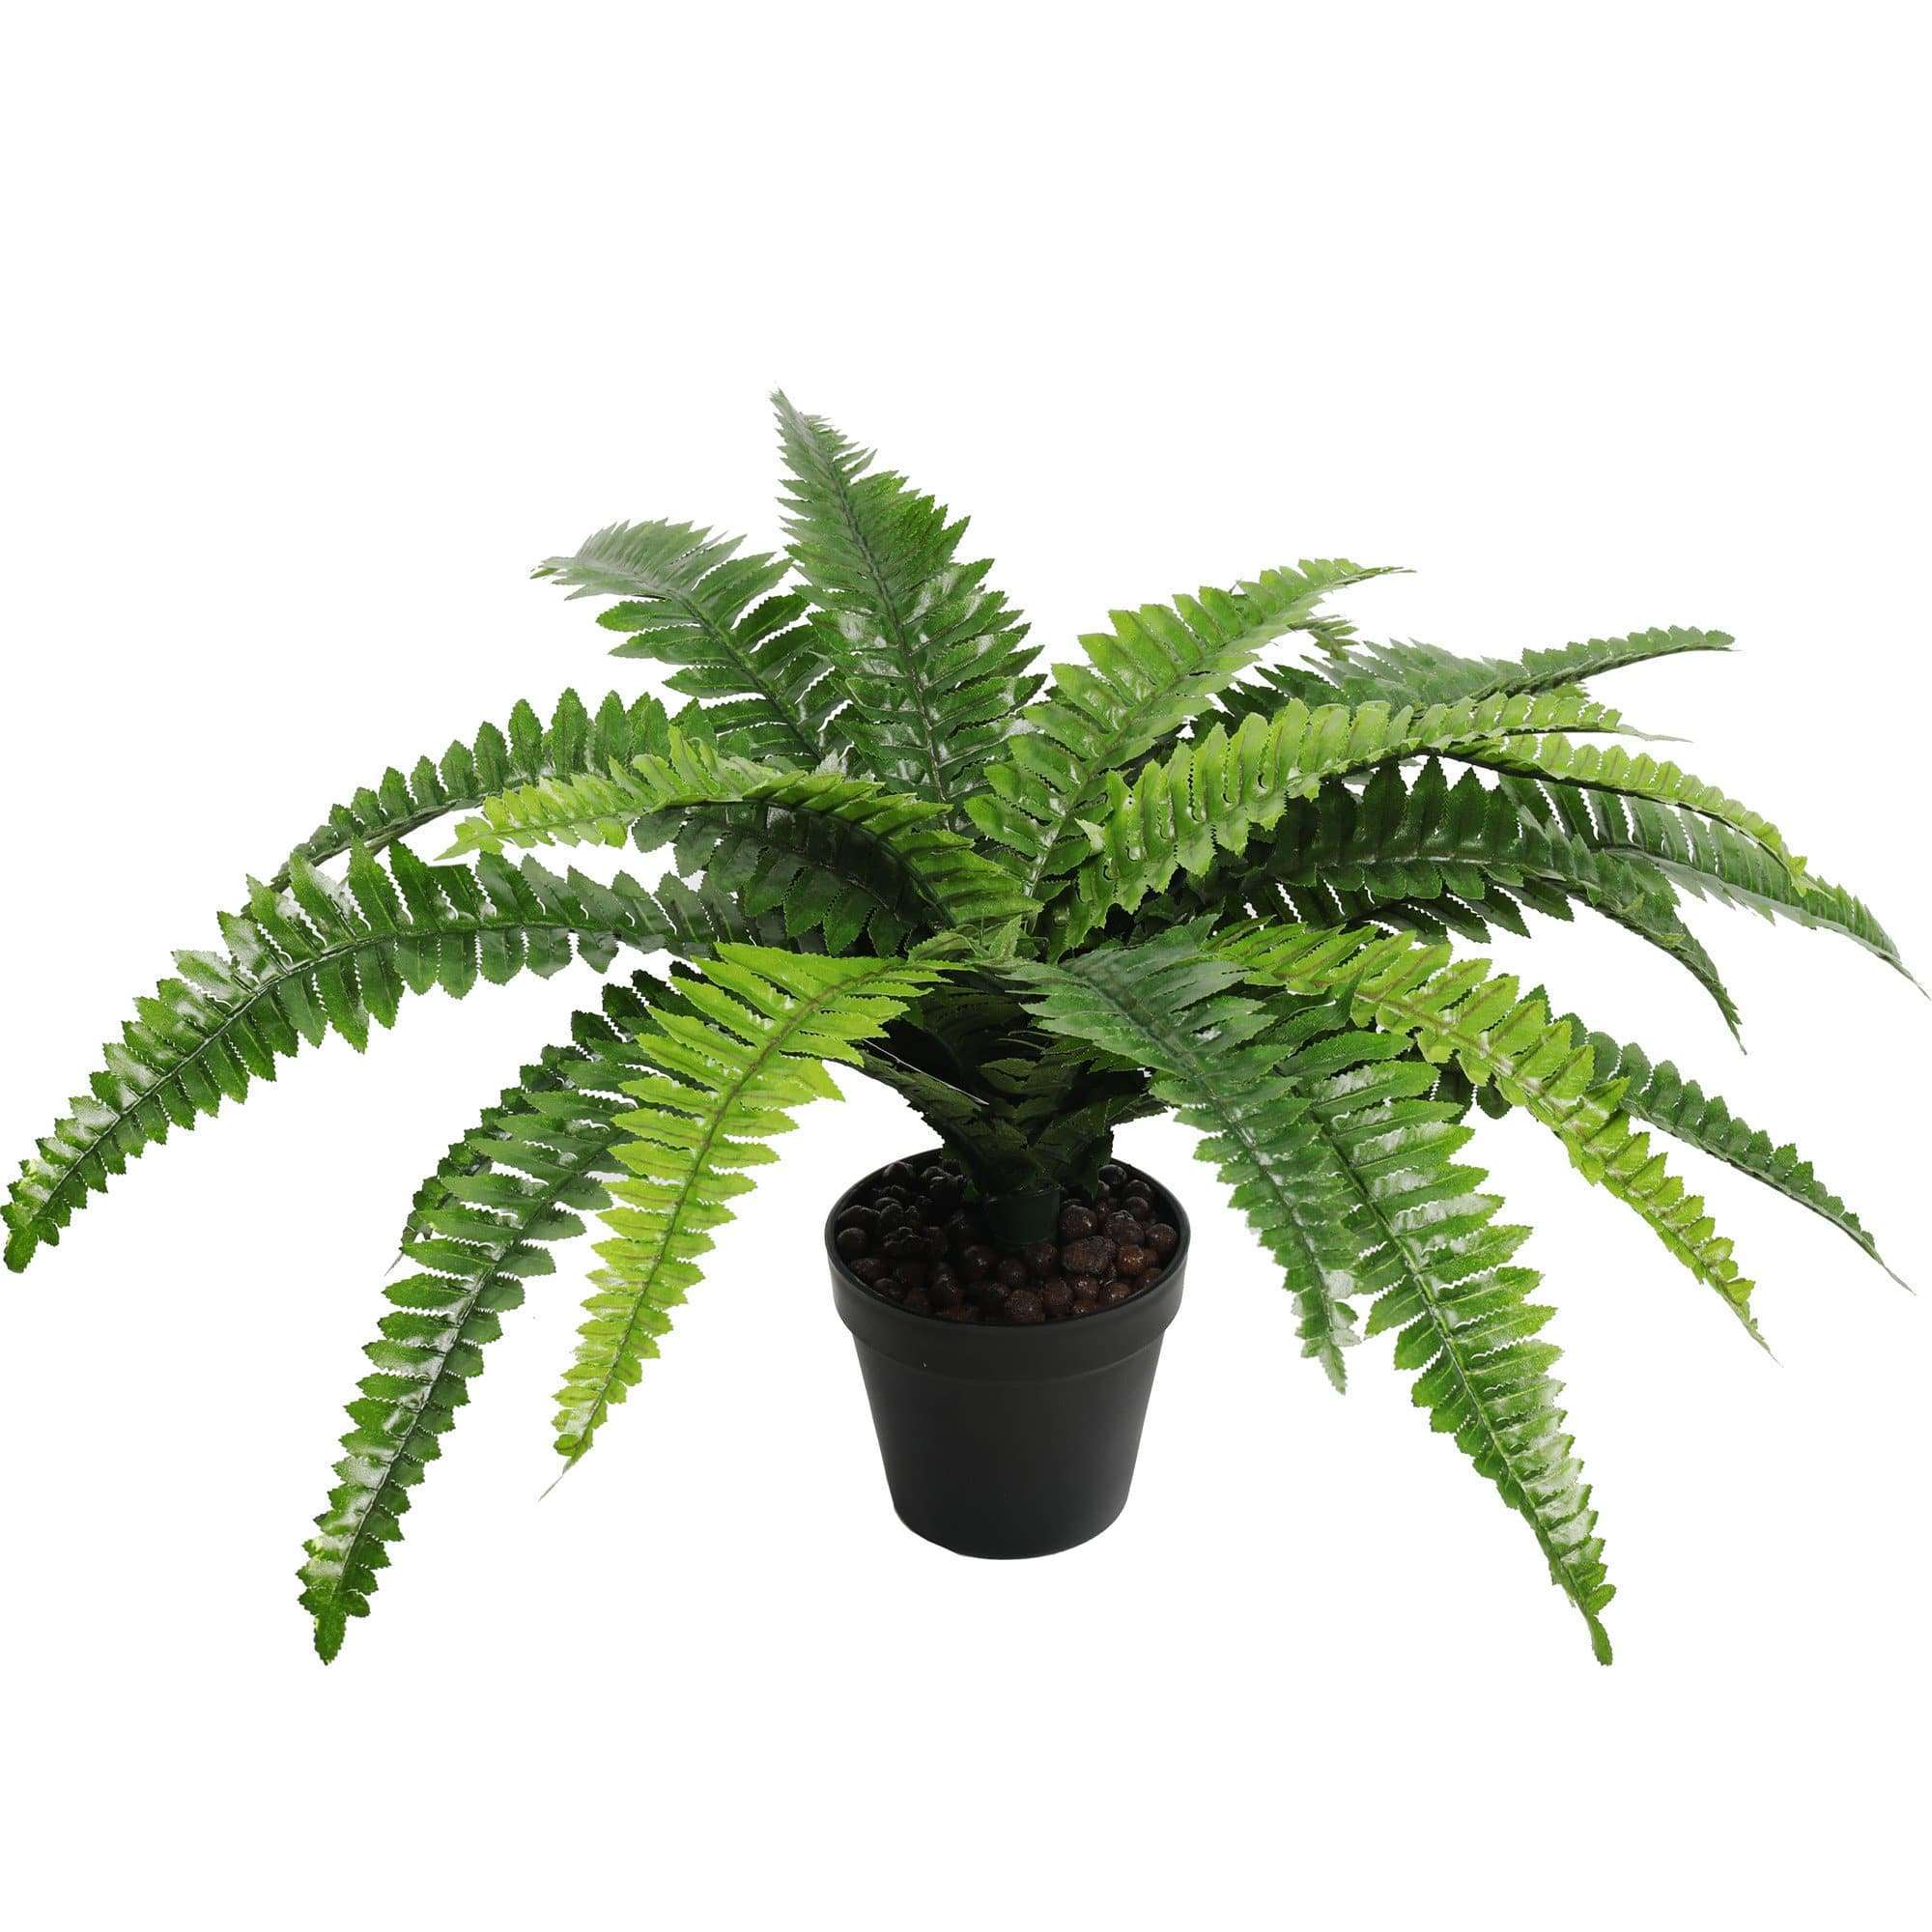 potted-natural-green-artificial-boston-fern-50cm-high-70cm-wide-183175.jpg